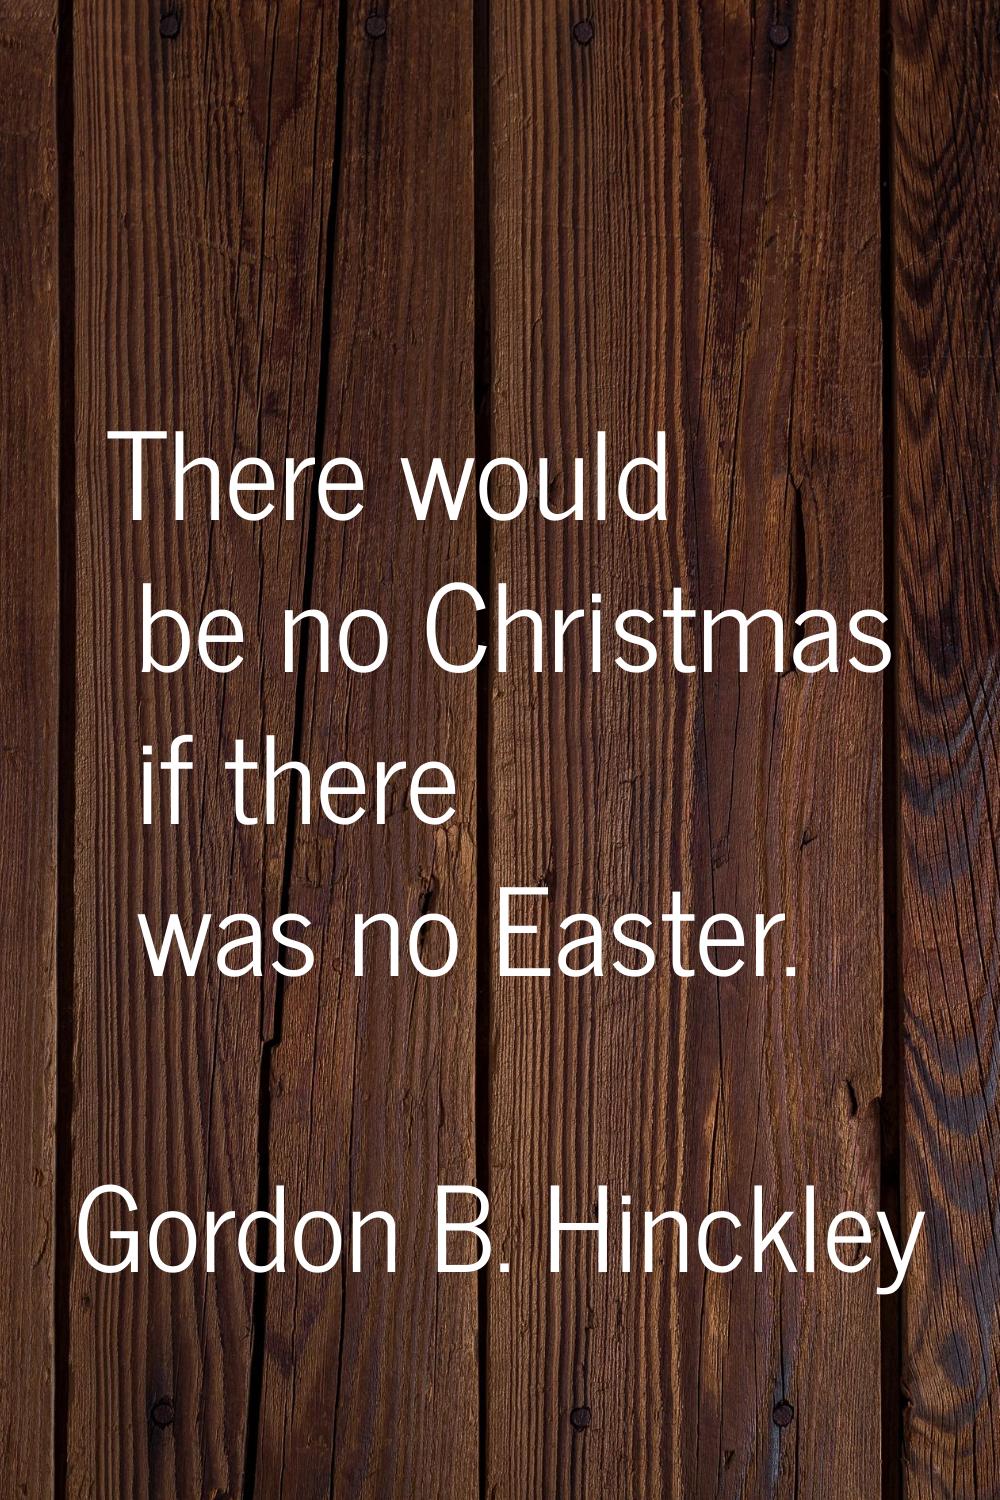 There would be no Christmas if there was no Easter.